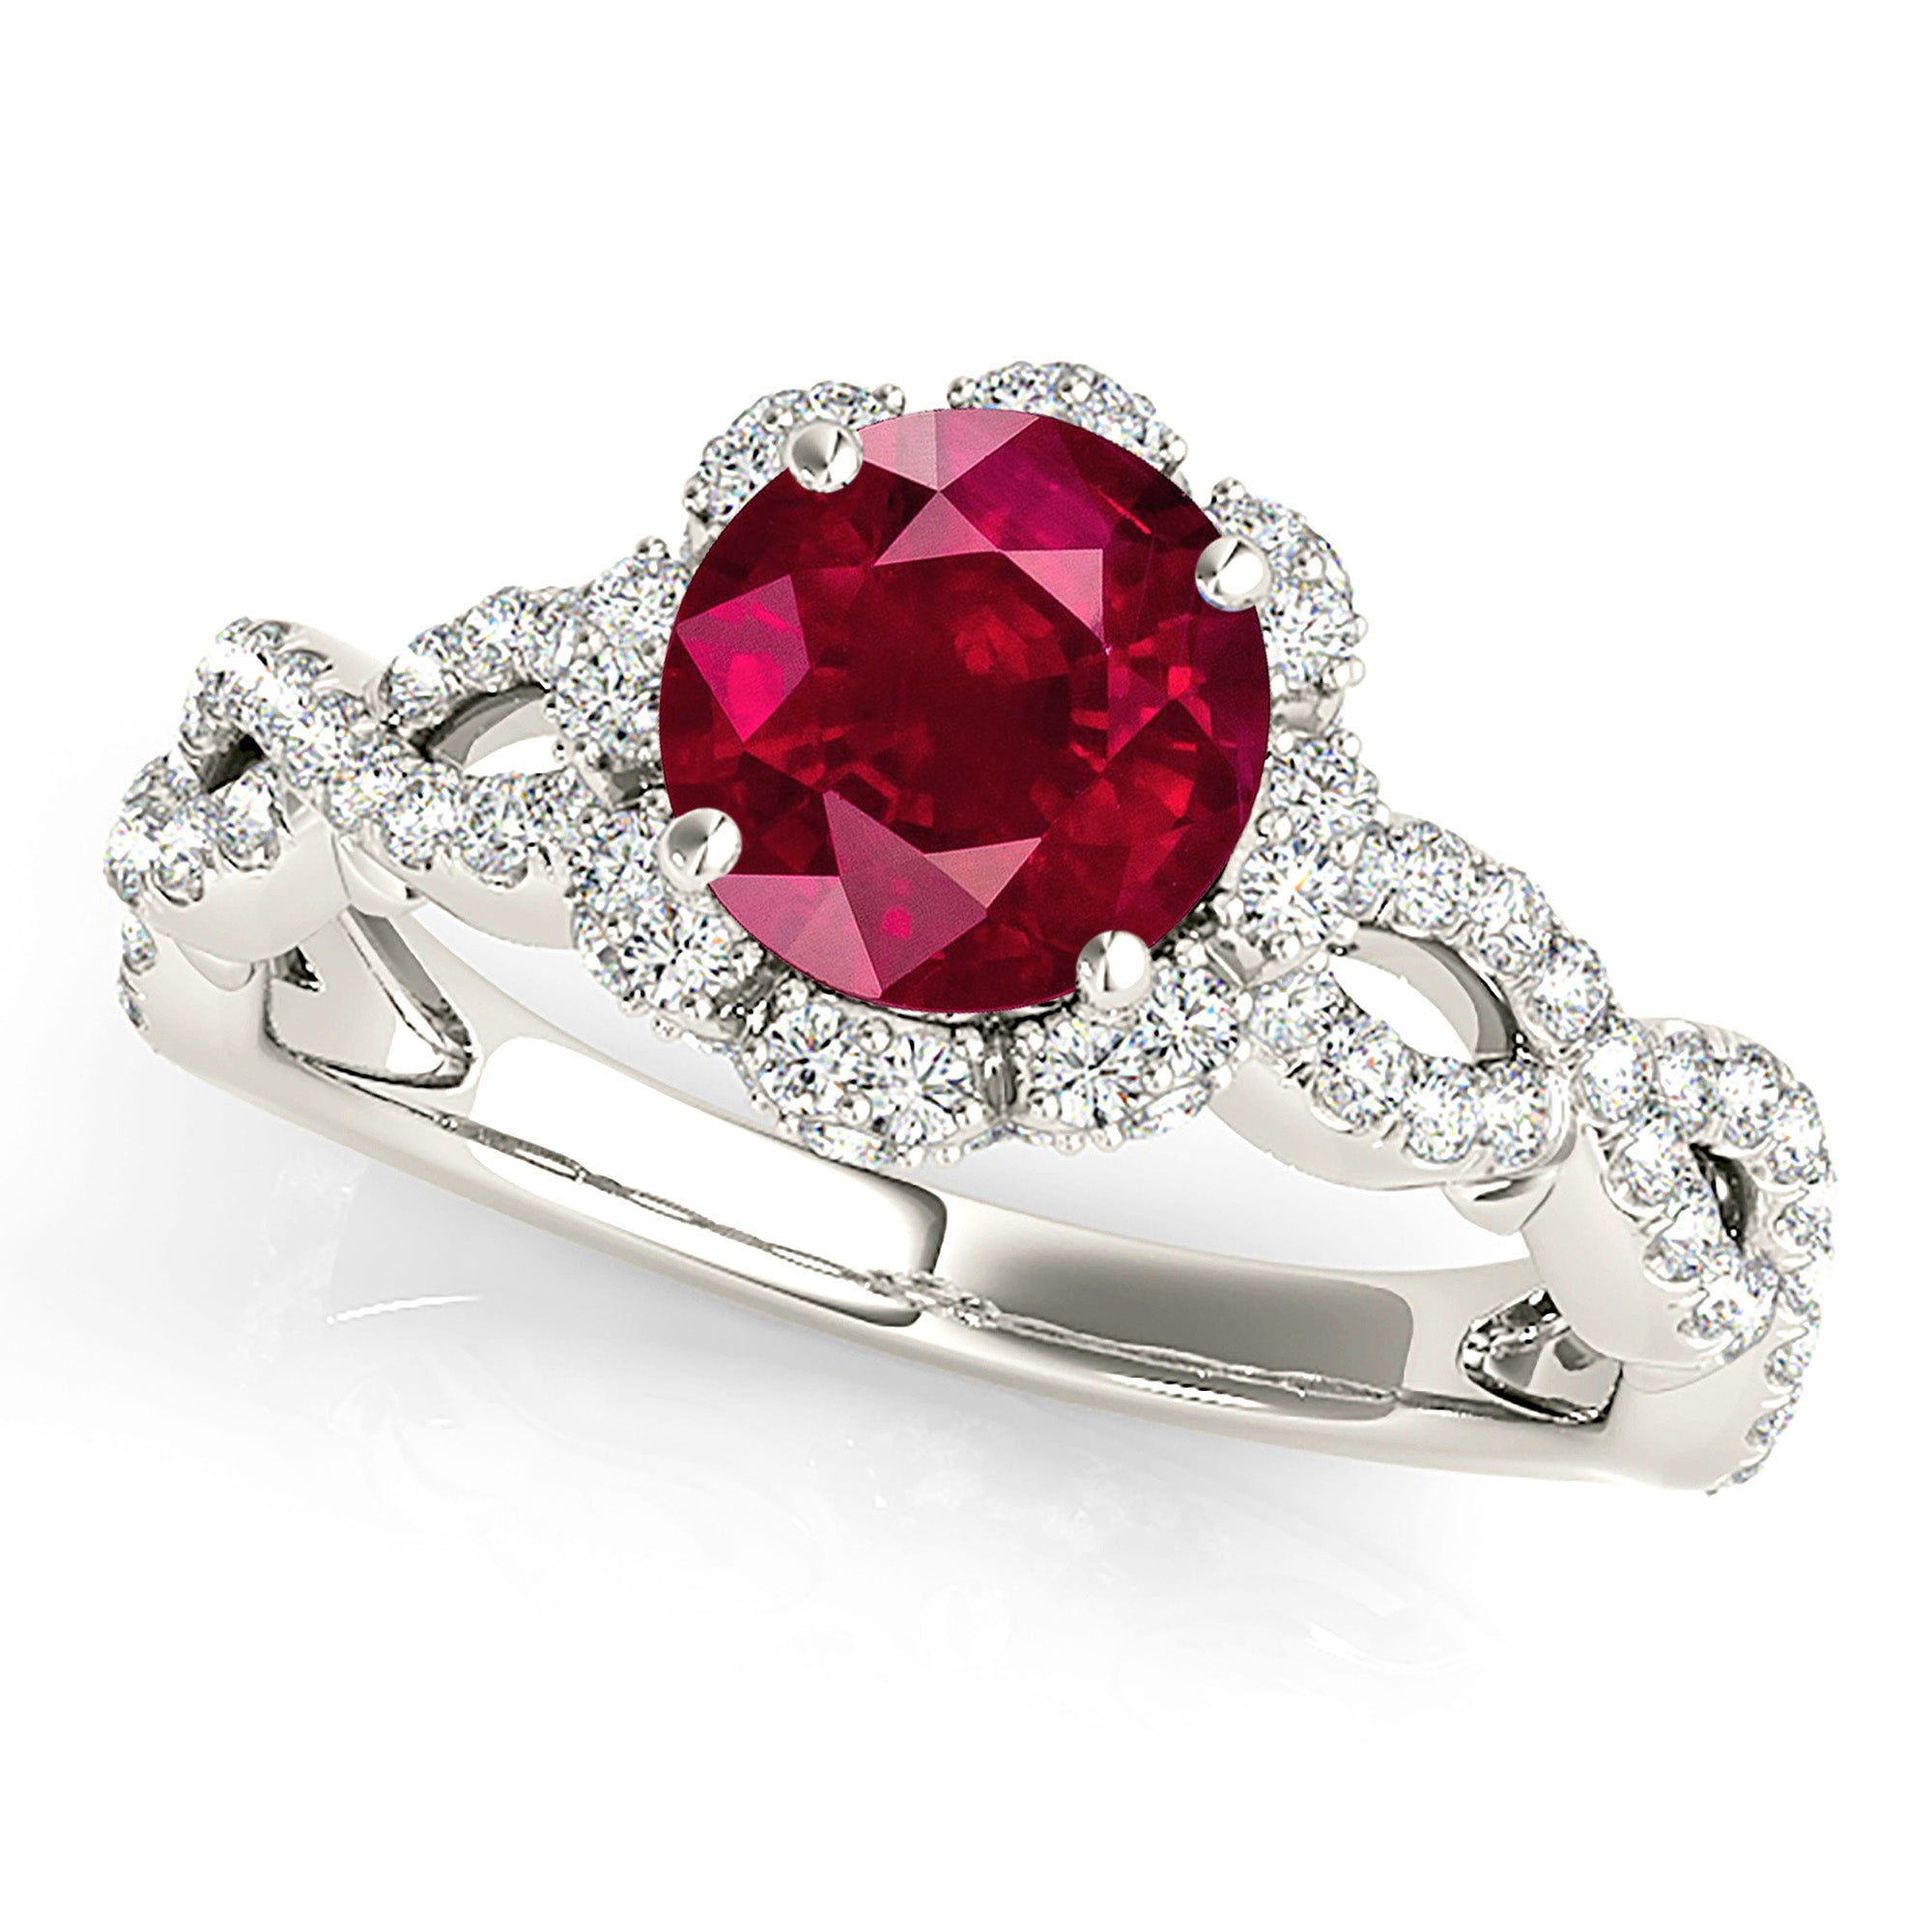 1.35 ct. Genuine Ruby Ring With 0.70 ctw. Diamond Floral Halo And Open Braid Diamond Band-in 14K/18K White, Yellow, Rose Gold and Platinum - Christmas Jewelry Gift -VIRABYANI